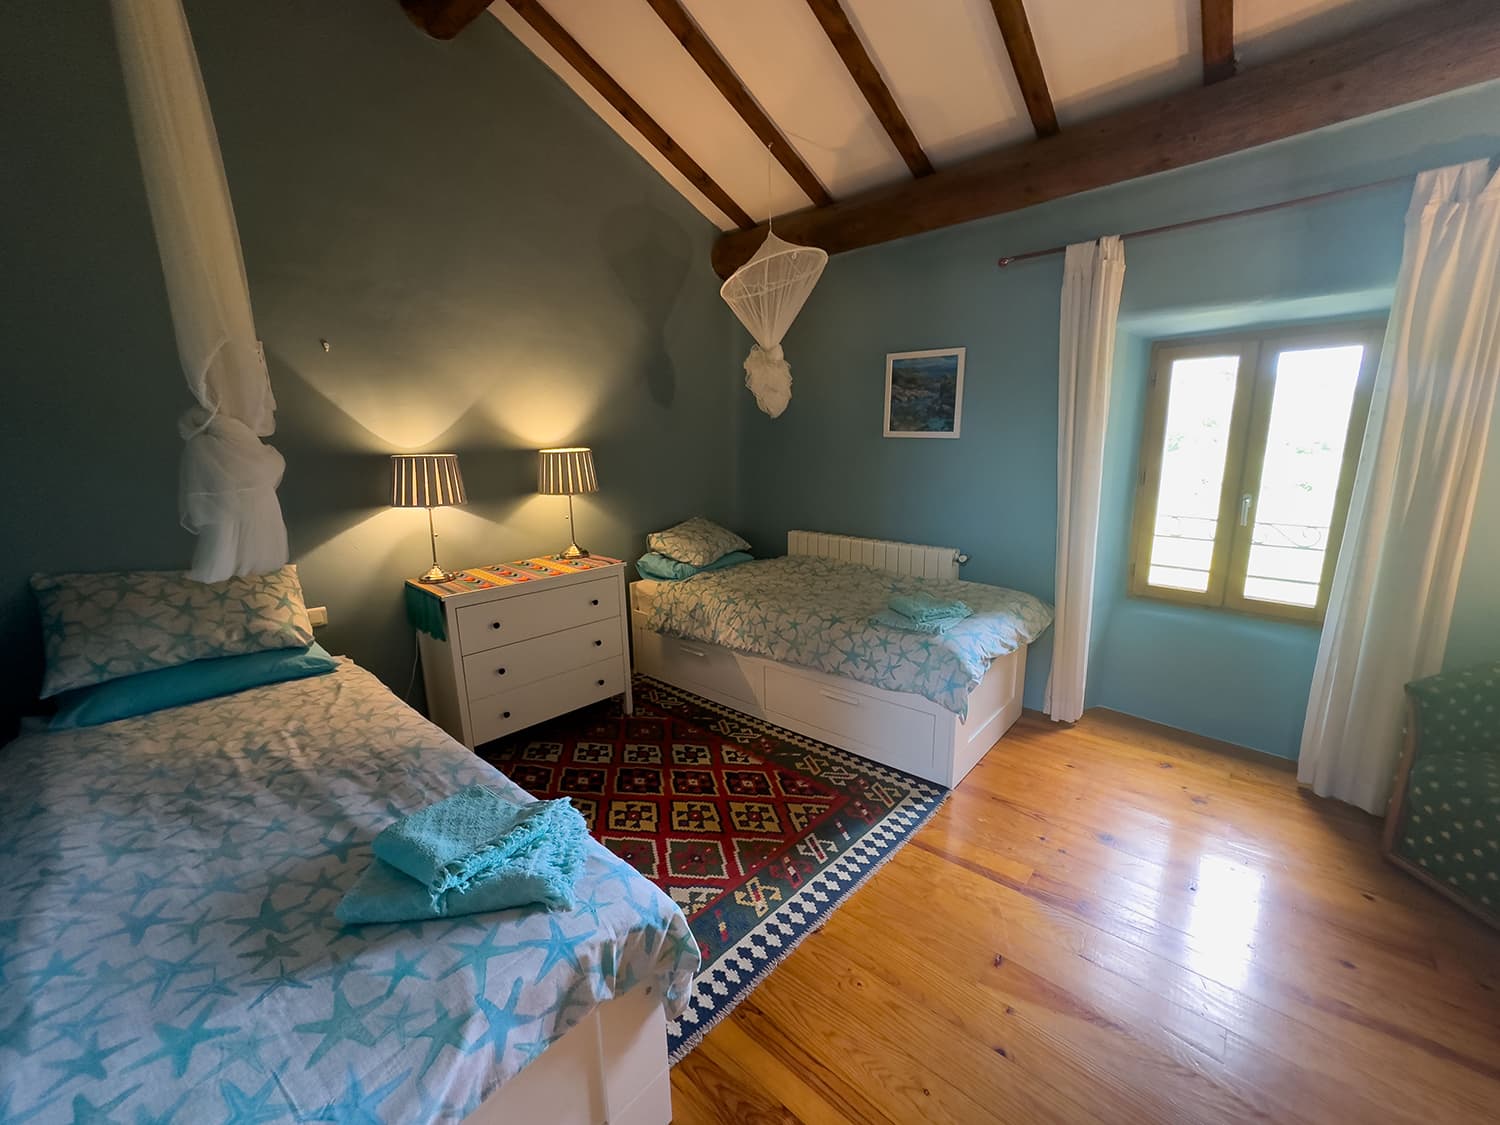 Bedroom | Holiday home in Gard, South of France